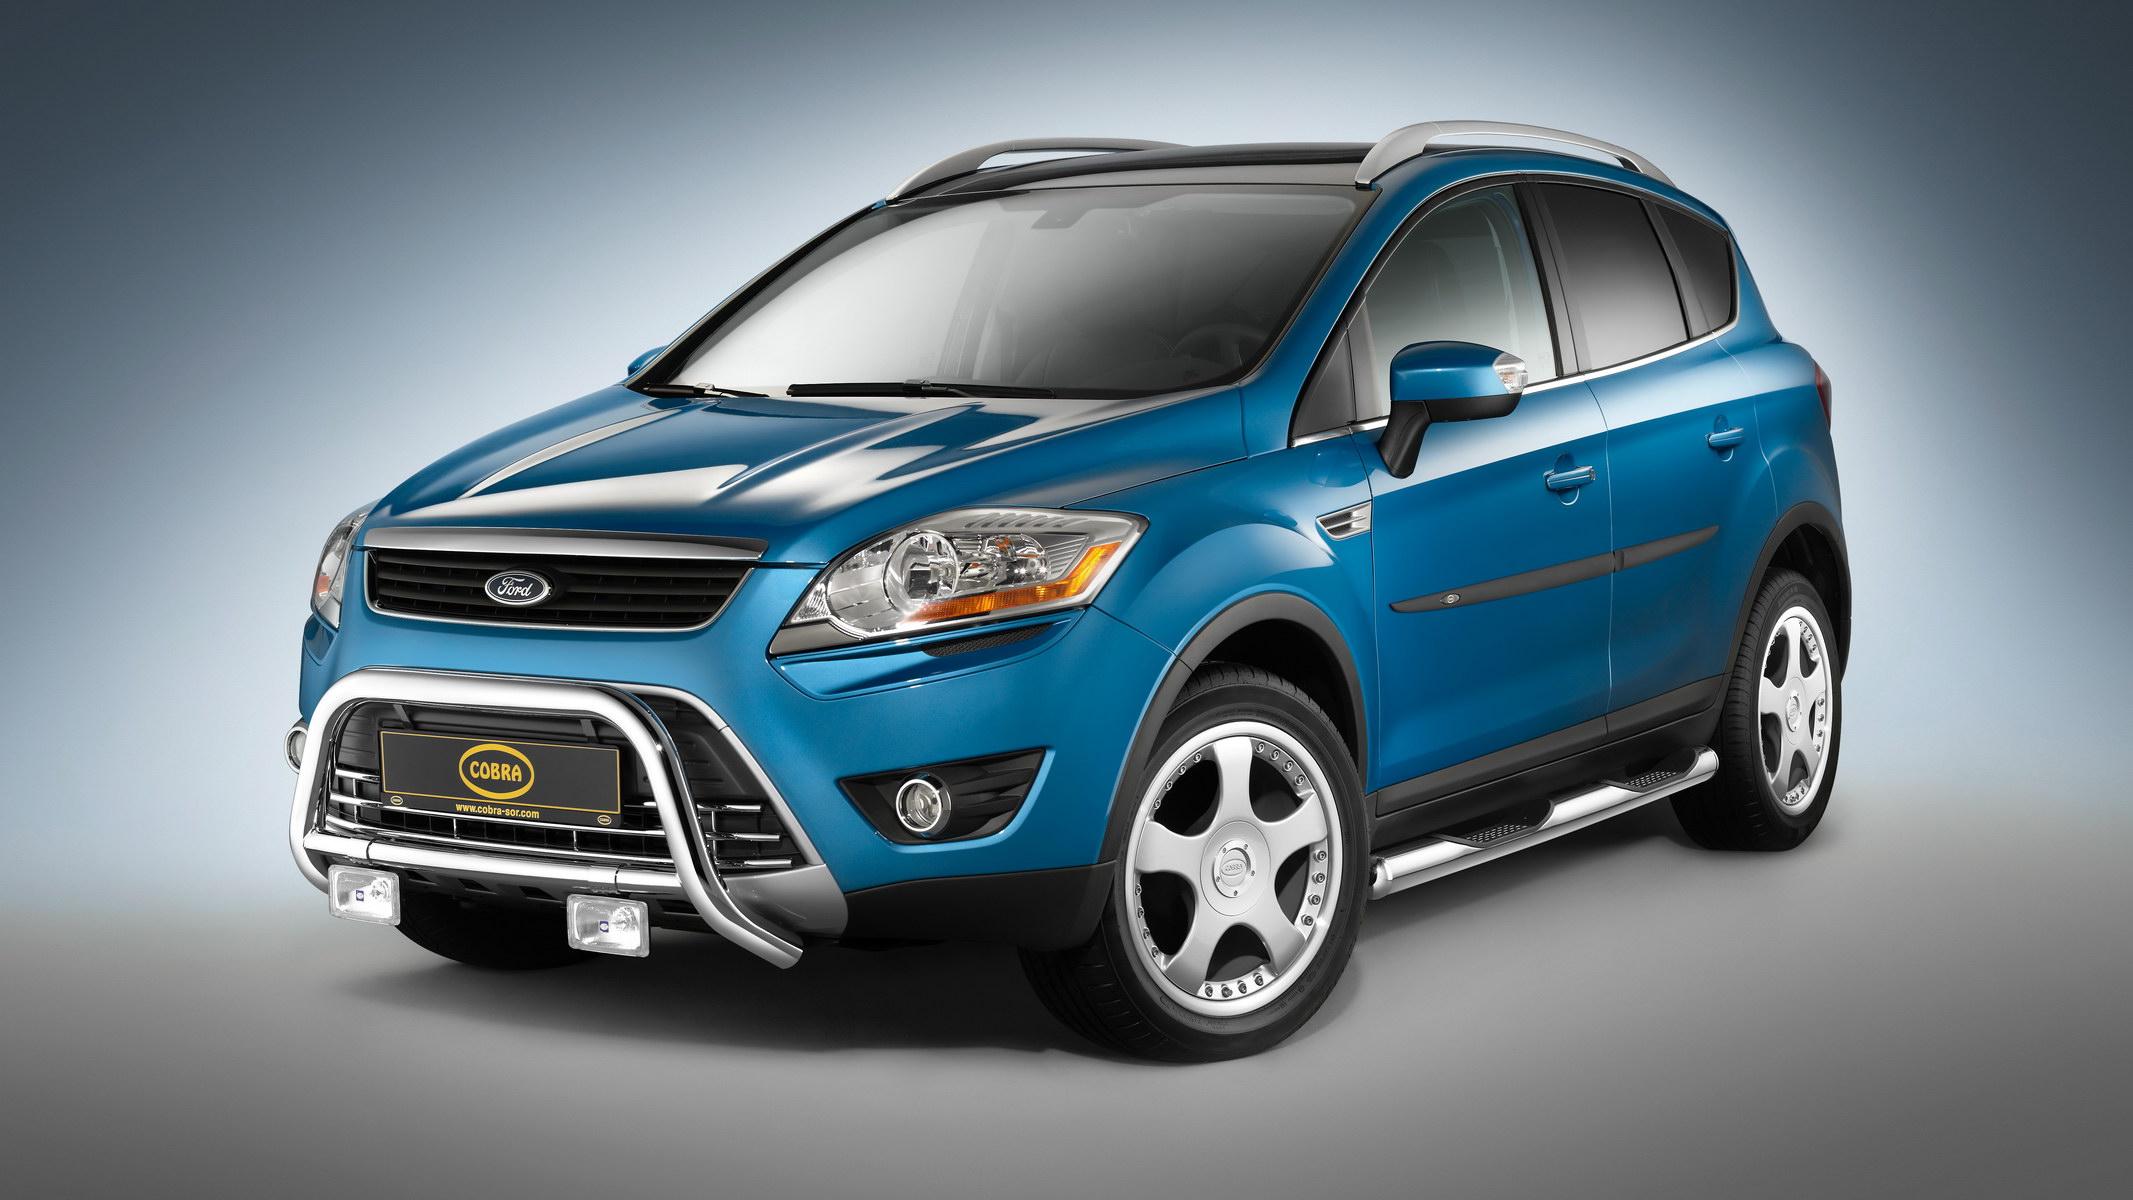 Ford Kuga By Cobra Picture, Photo, Wallpaper